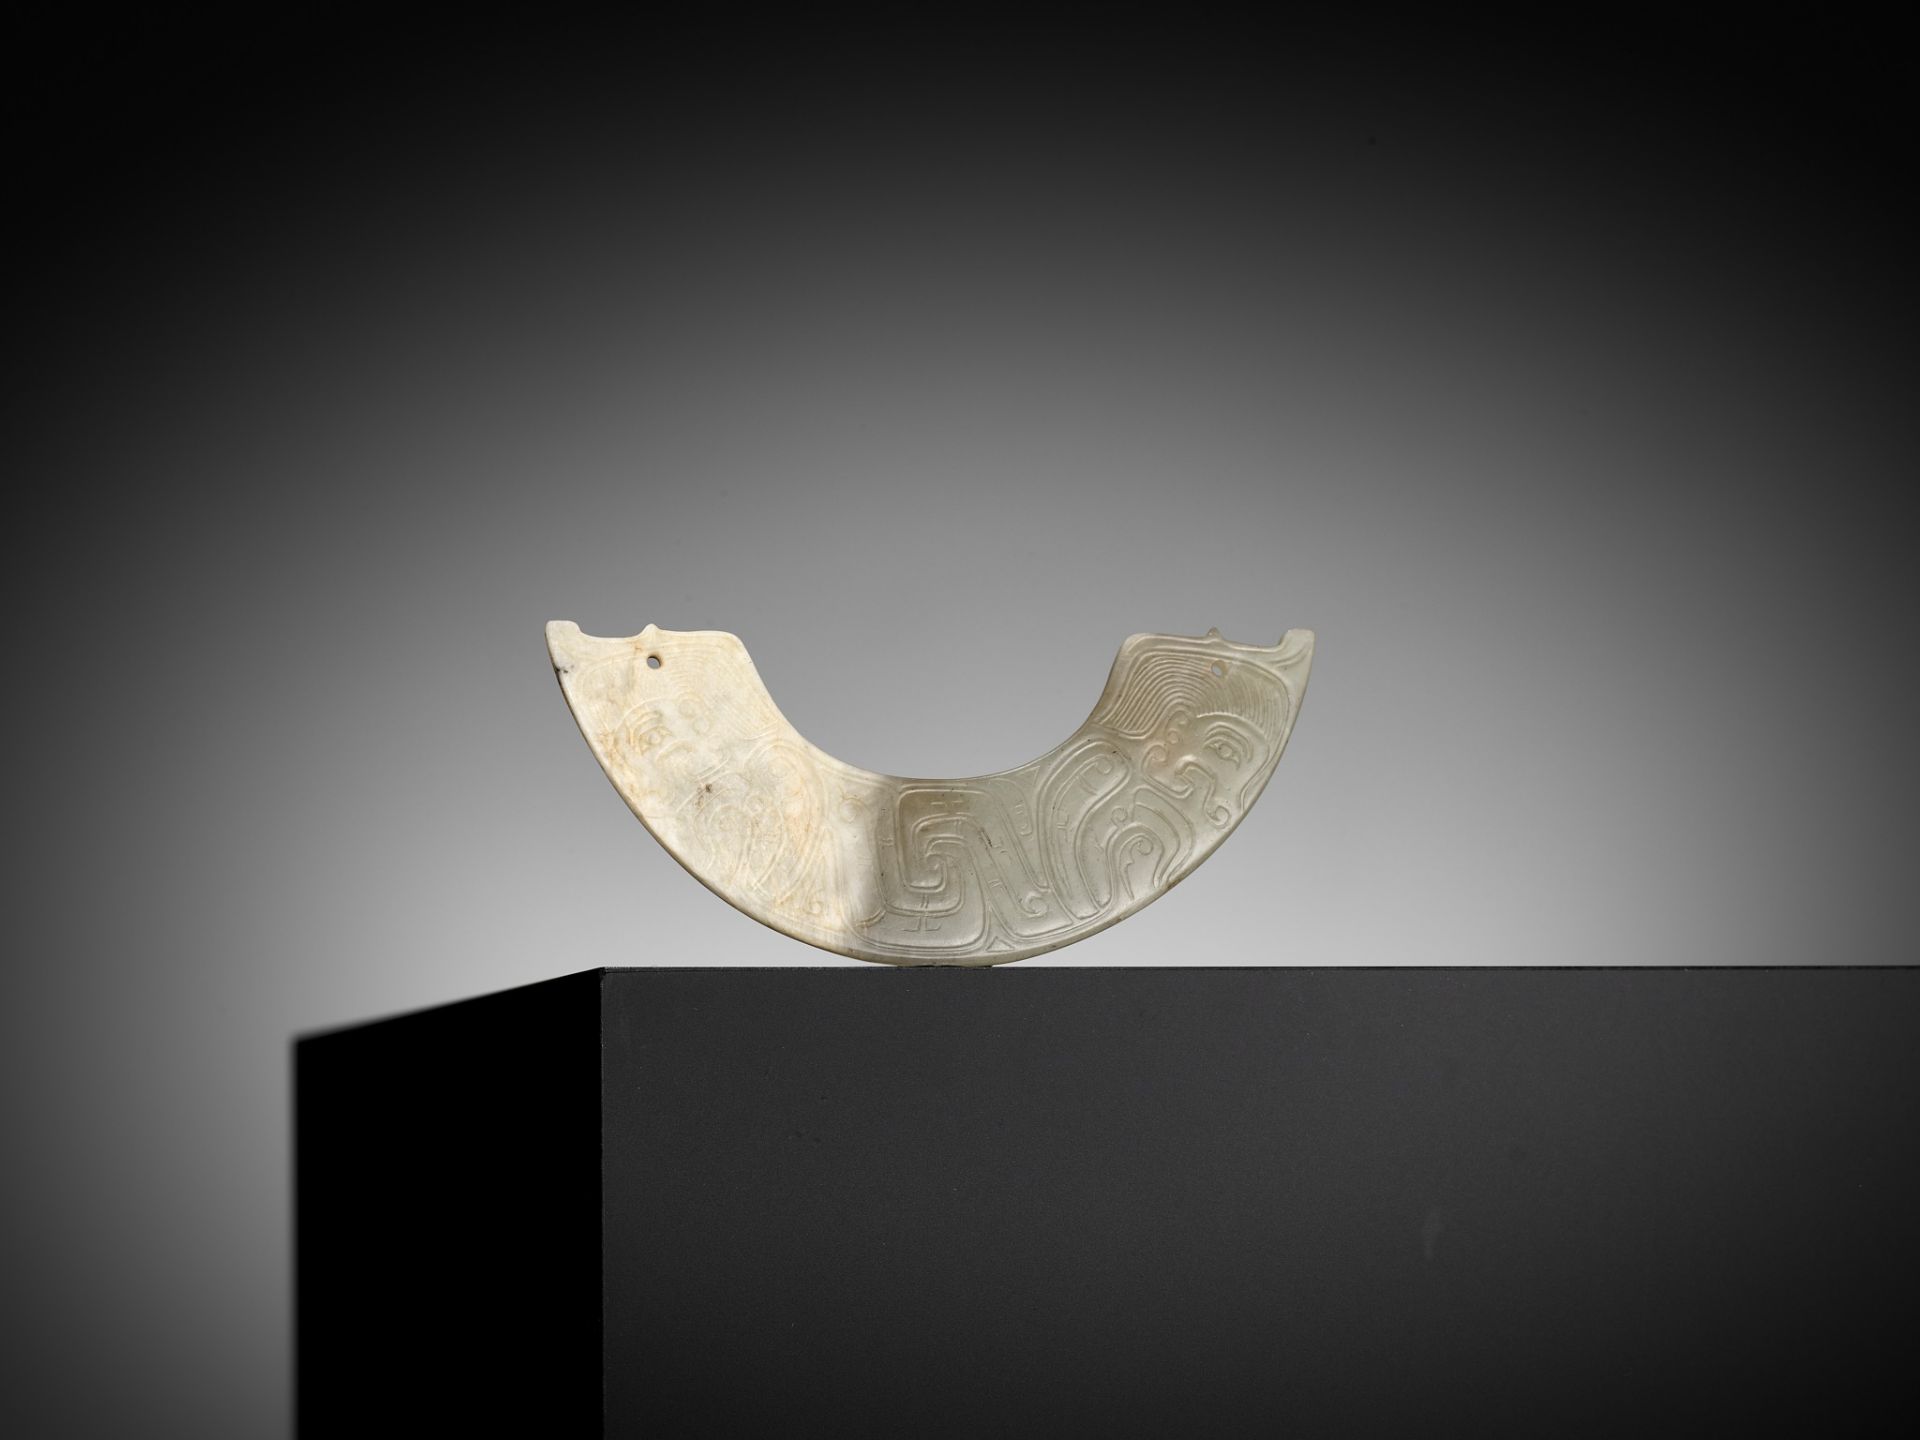 A SMALL PALE CELADON JADE 'HUMAN FIGURE' ORNAMENT, HUANG, WESTERN ZHOU DYNASTY - Image 10 of 11